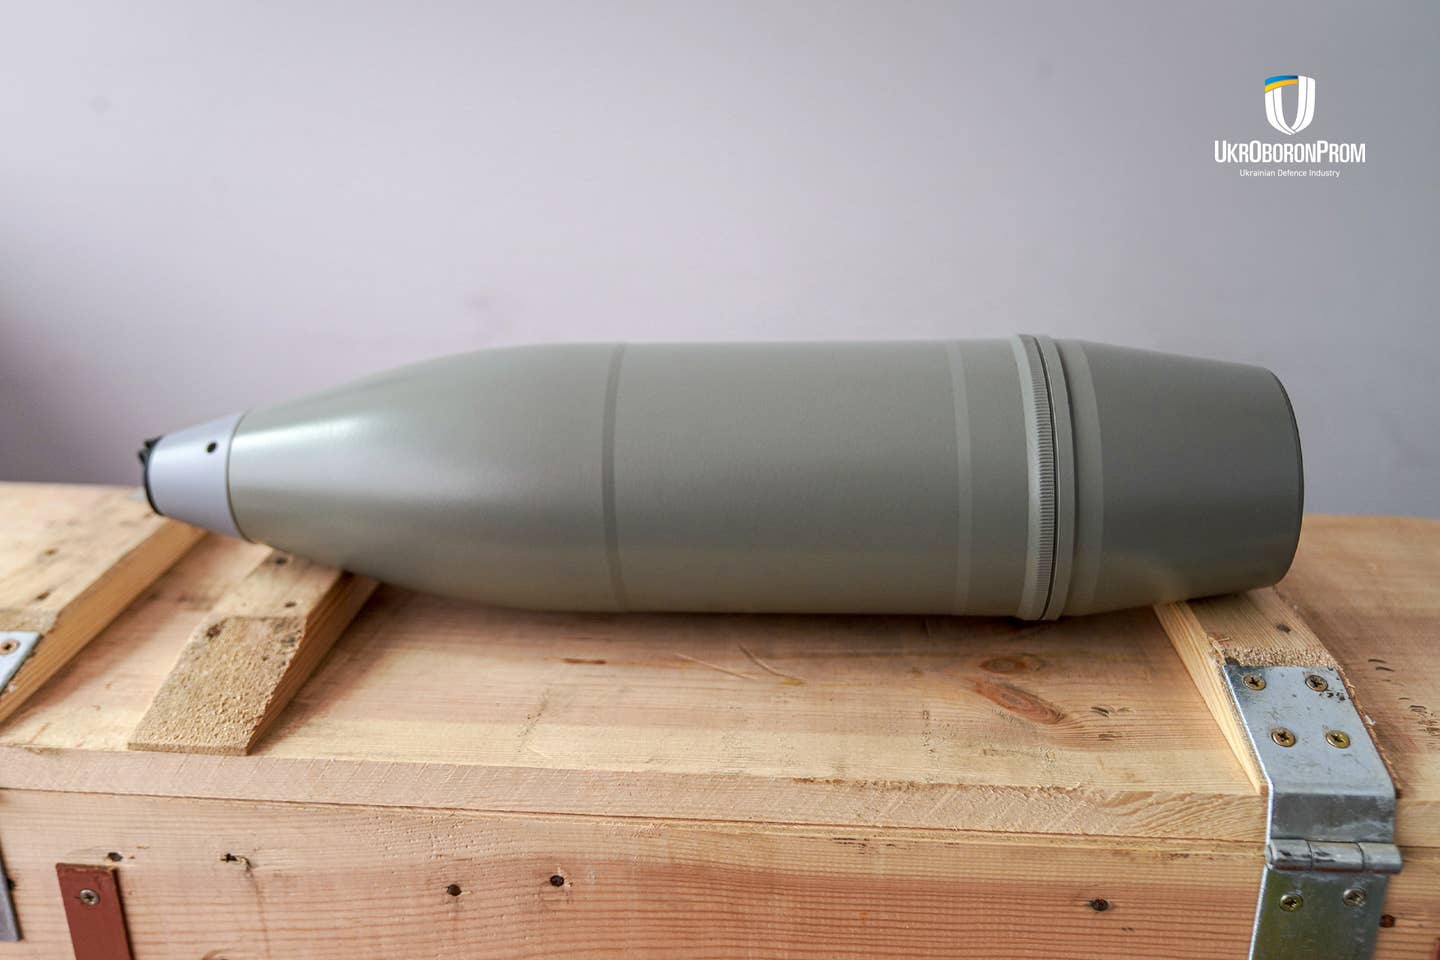 A 122mm artillery shell, made in a NATO country in cooperation with Ukroboronprom, have already arrived on the front lines the company said. (Ukroboronprom photo)